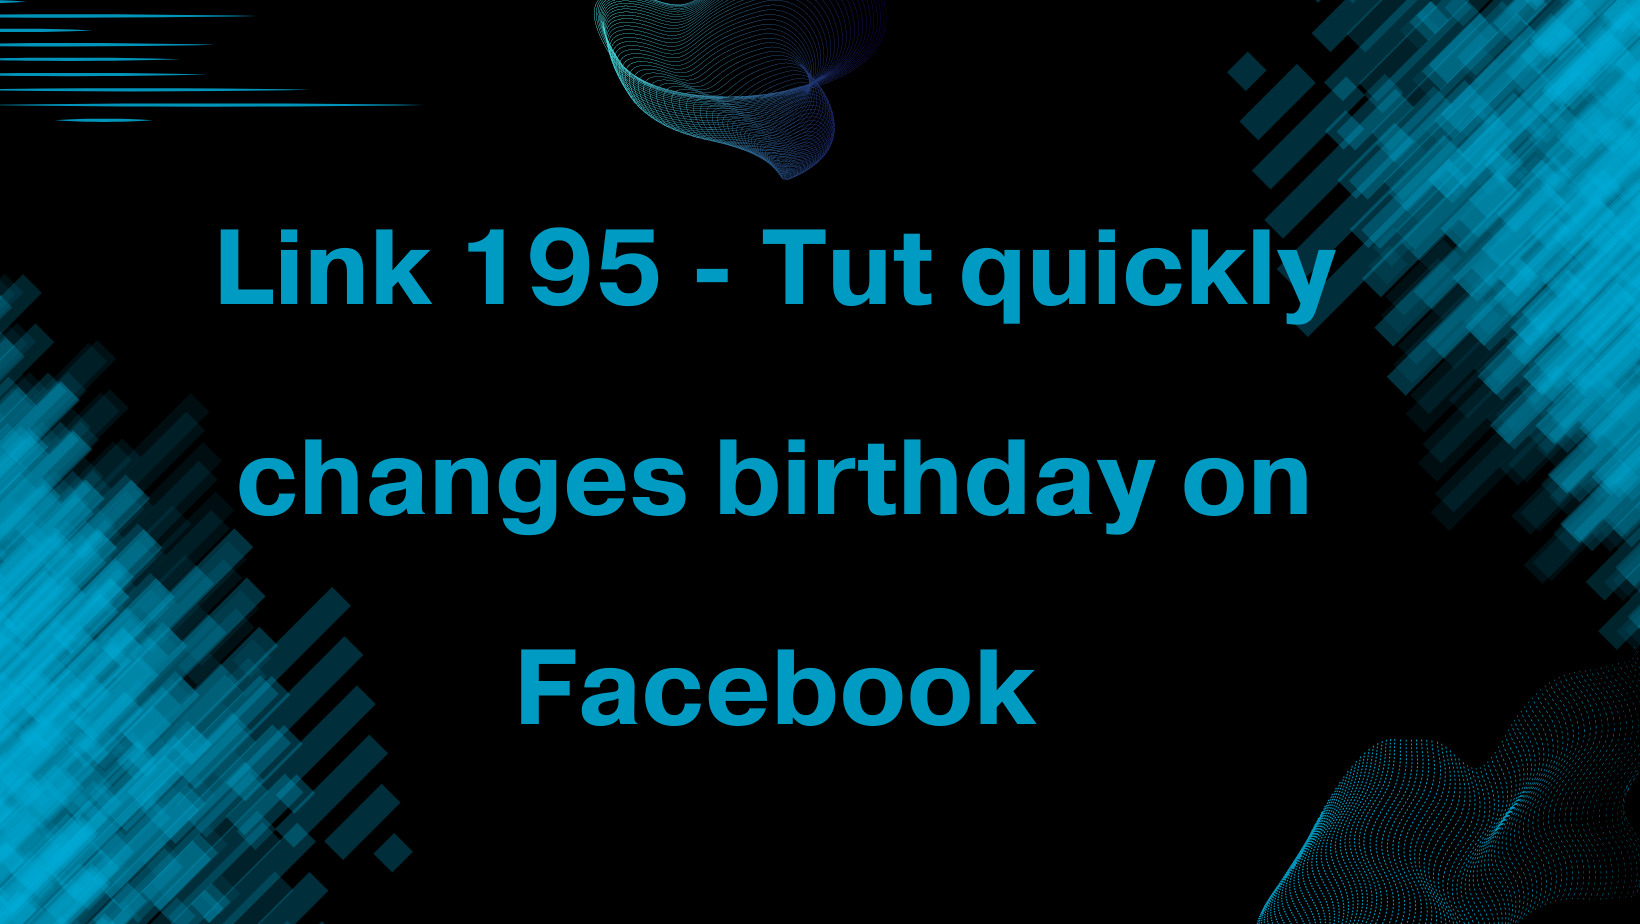 Link 195 – Tut quickly changes birthday on Facebook